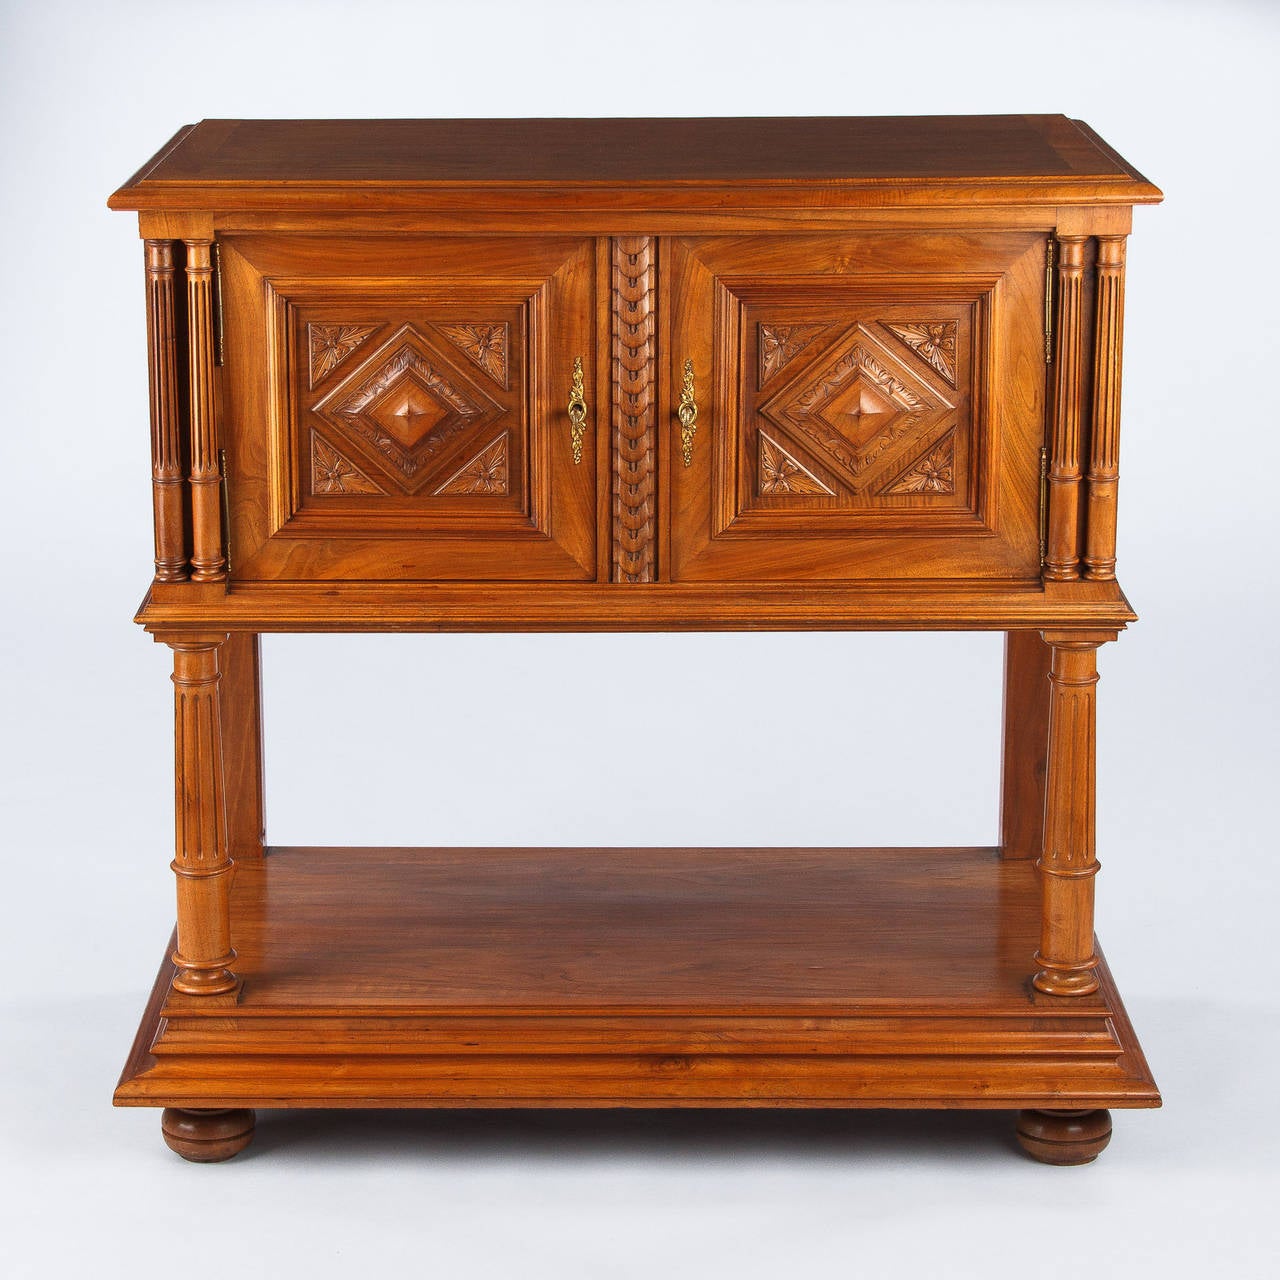 20th Century Renaissance Style Walnut Sideboard Cabinet from France, circa 1900s